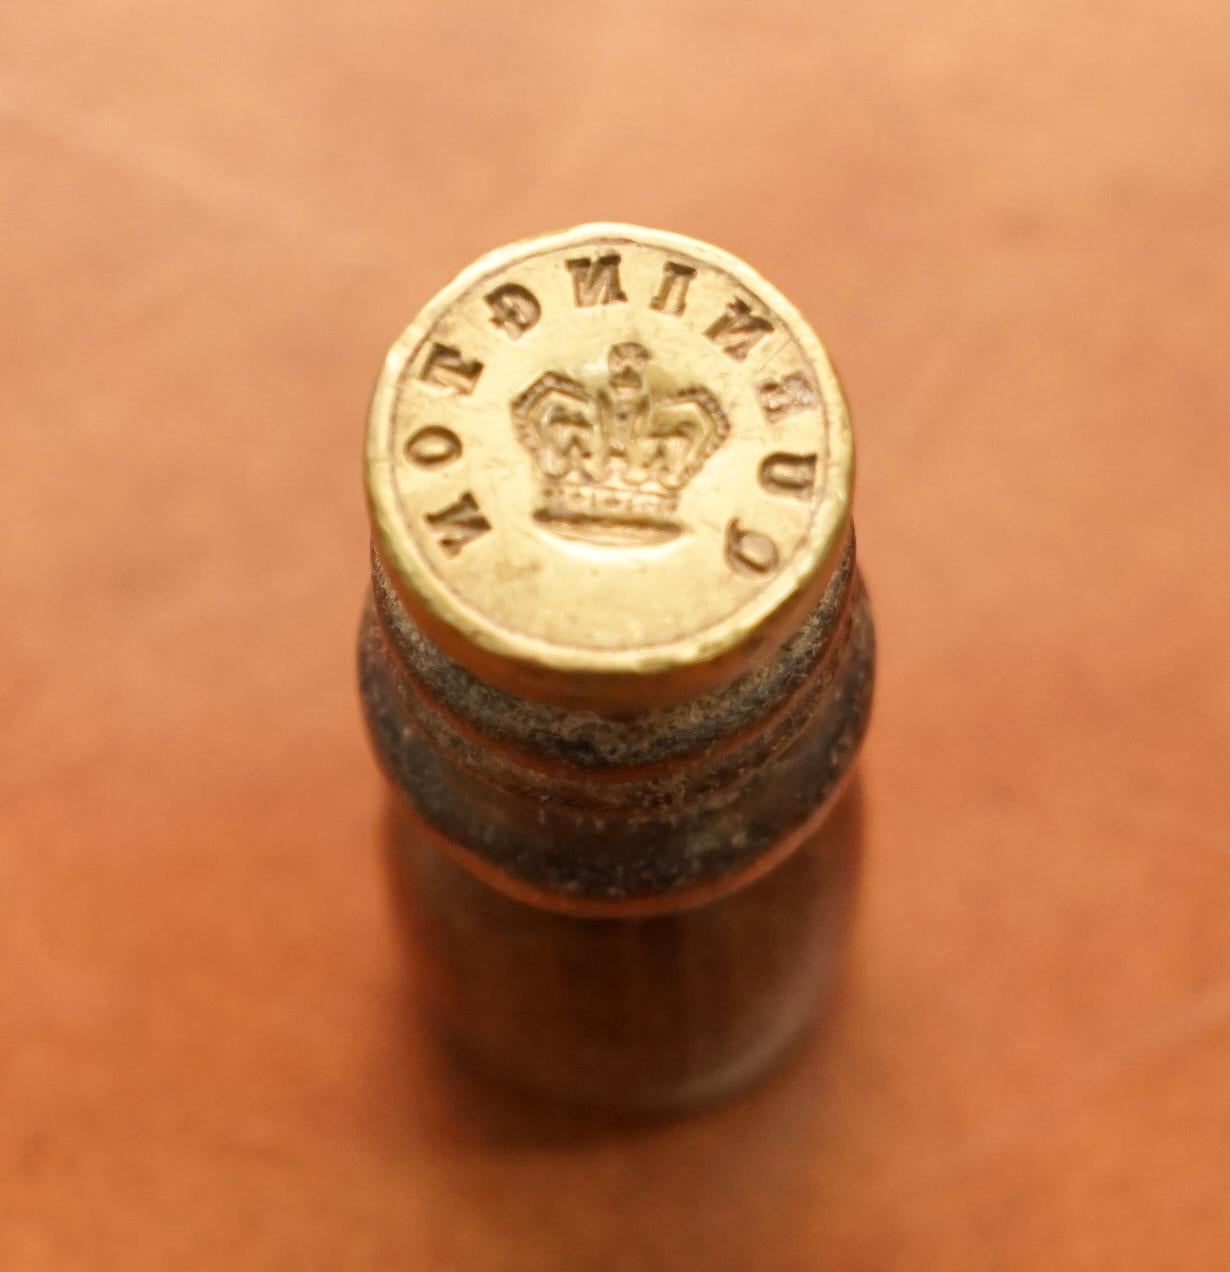 We are delighted to offer for sale this lovely original wax seal stamp with royal interest for Quenington

A lovely collectable thing, I’m unsure of the exact history but it has the name Quenington over a crown so one would assume it was a member